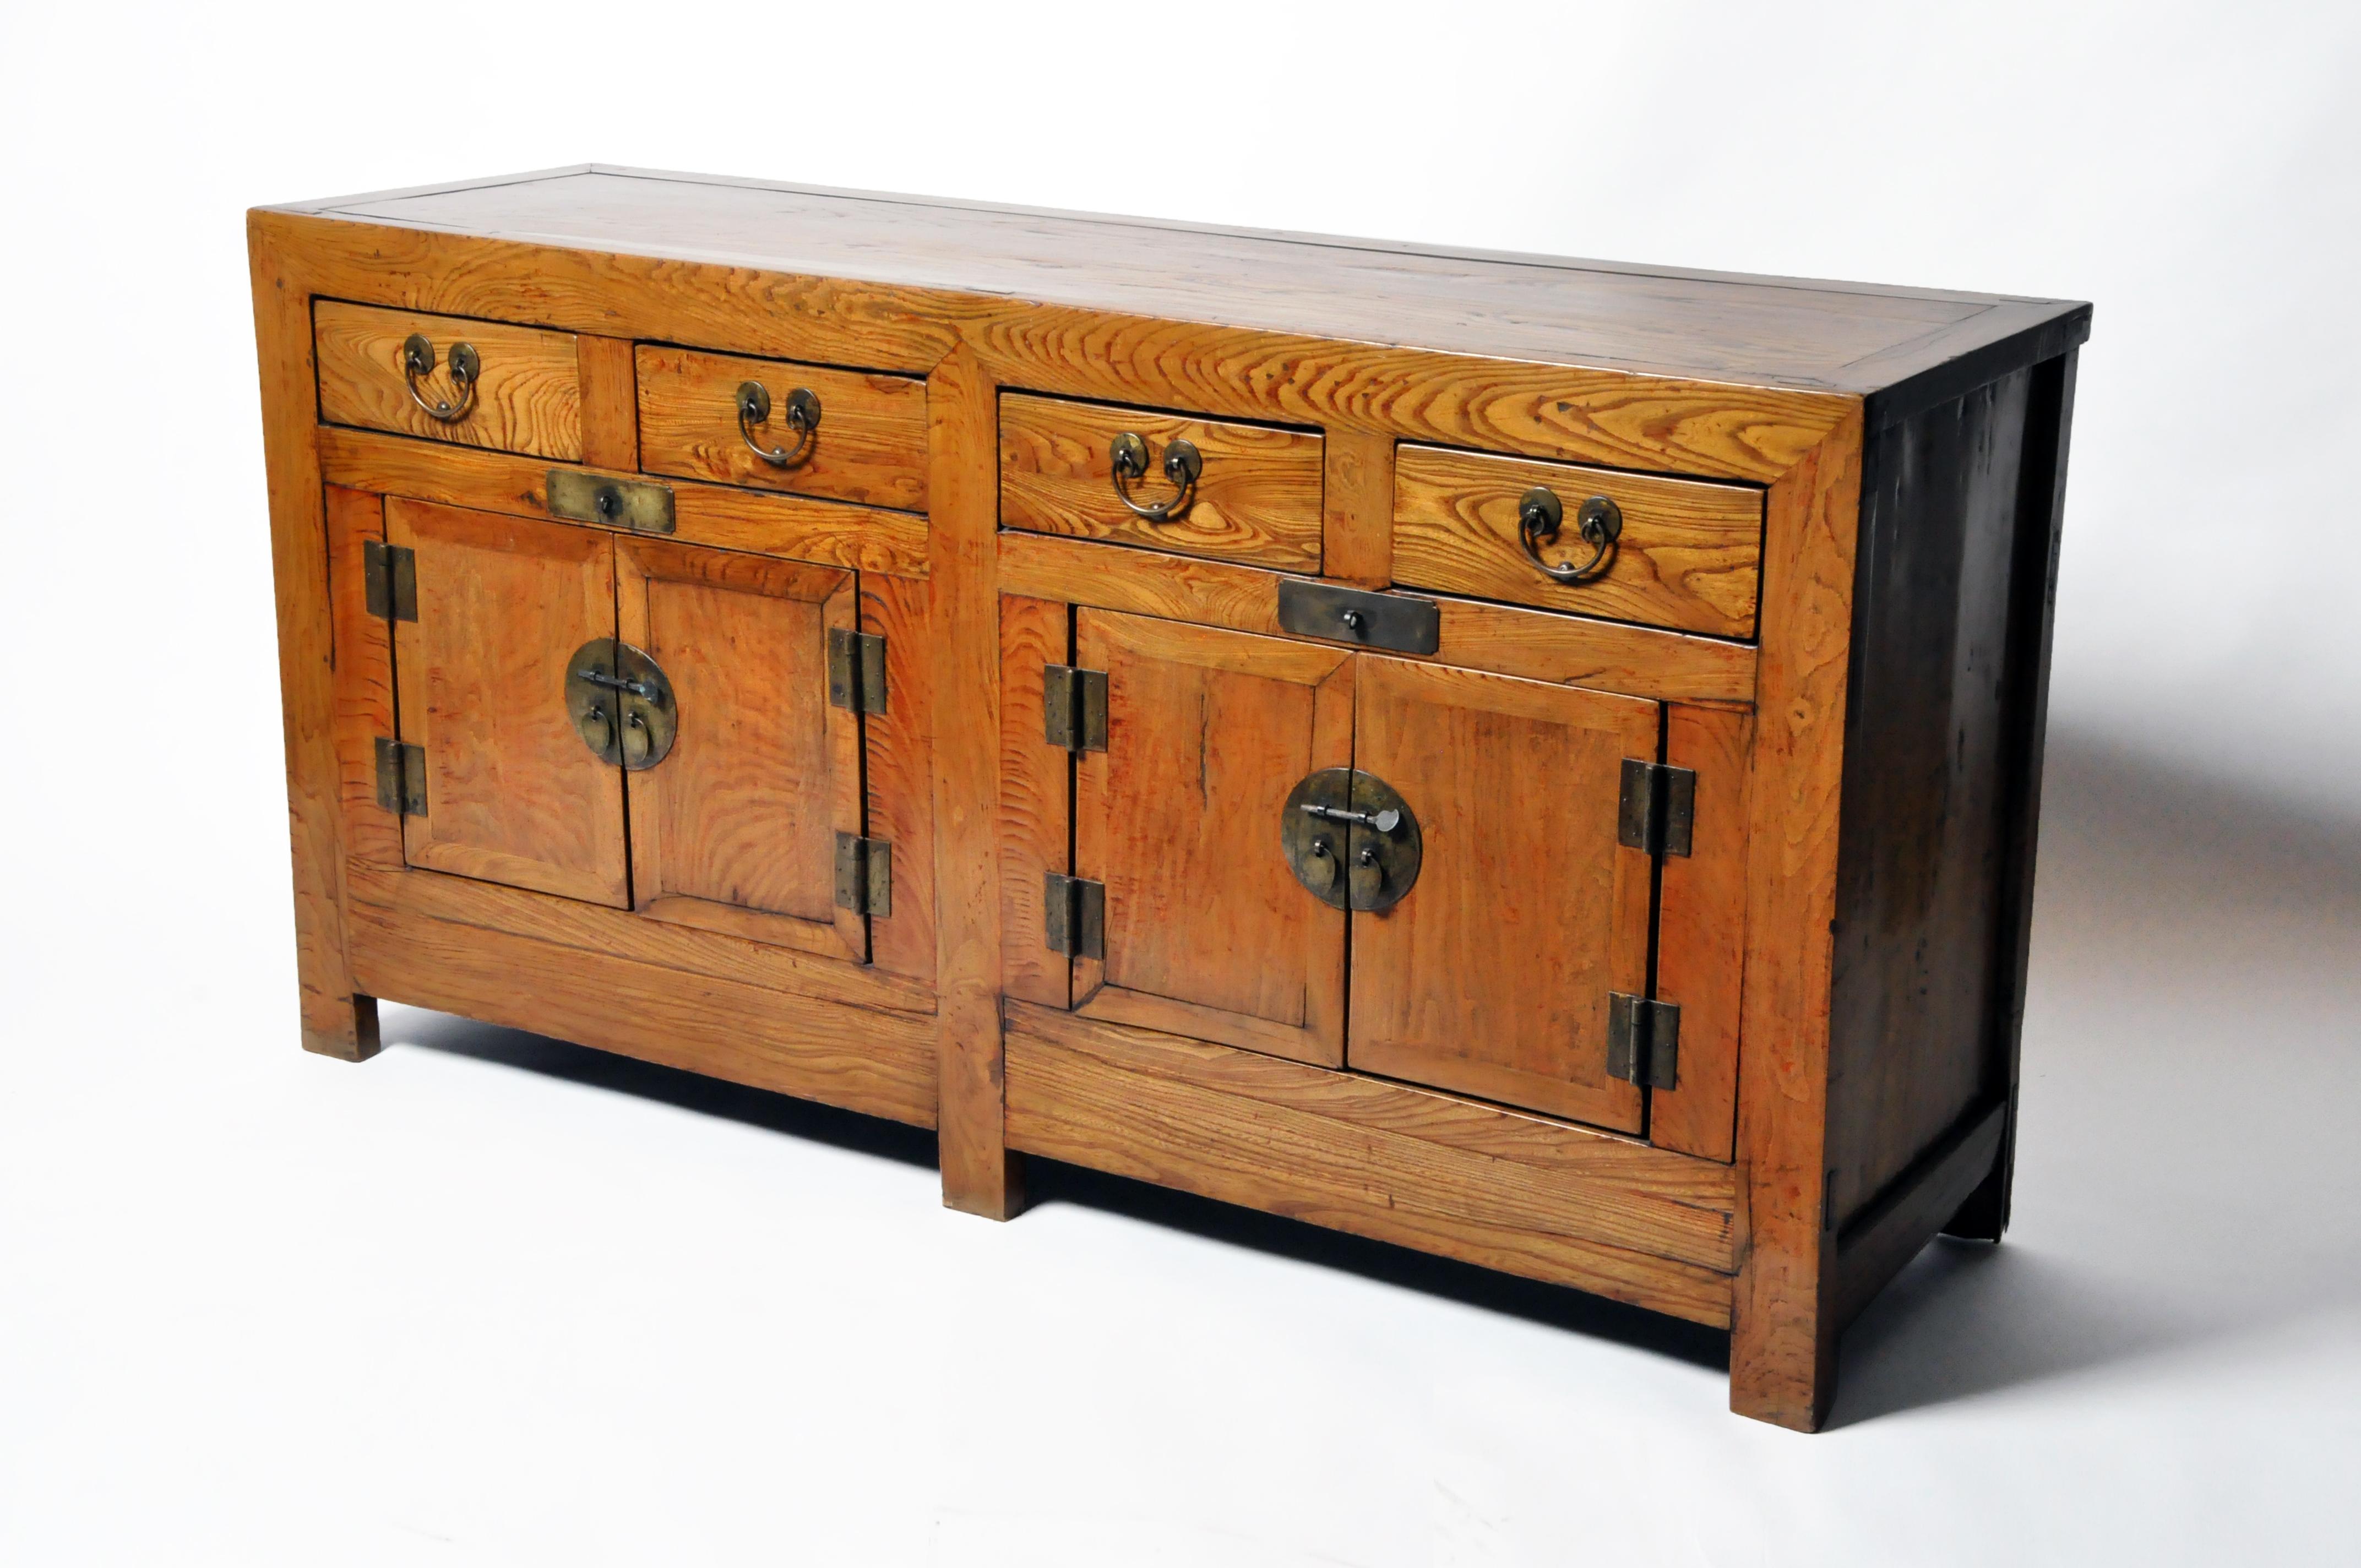 This handsome sideboard is from Tianjin, China, and made from elm wood and dates to the mid-1900s; during the time of Mao Zedong. The piece features four drawers, 2 pairs of doors, and a beautifully aged patina with some remnants of the original